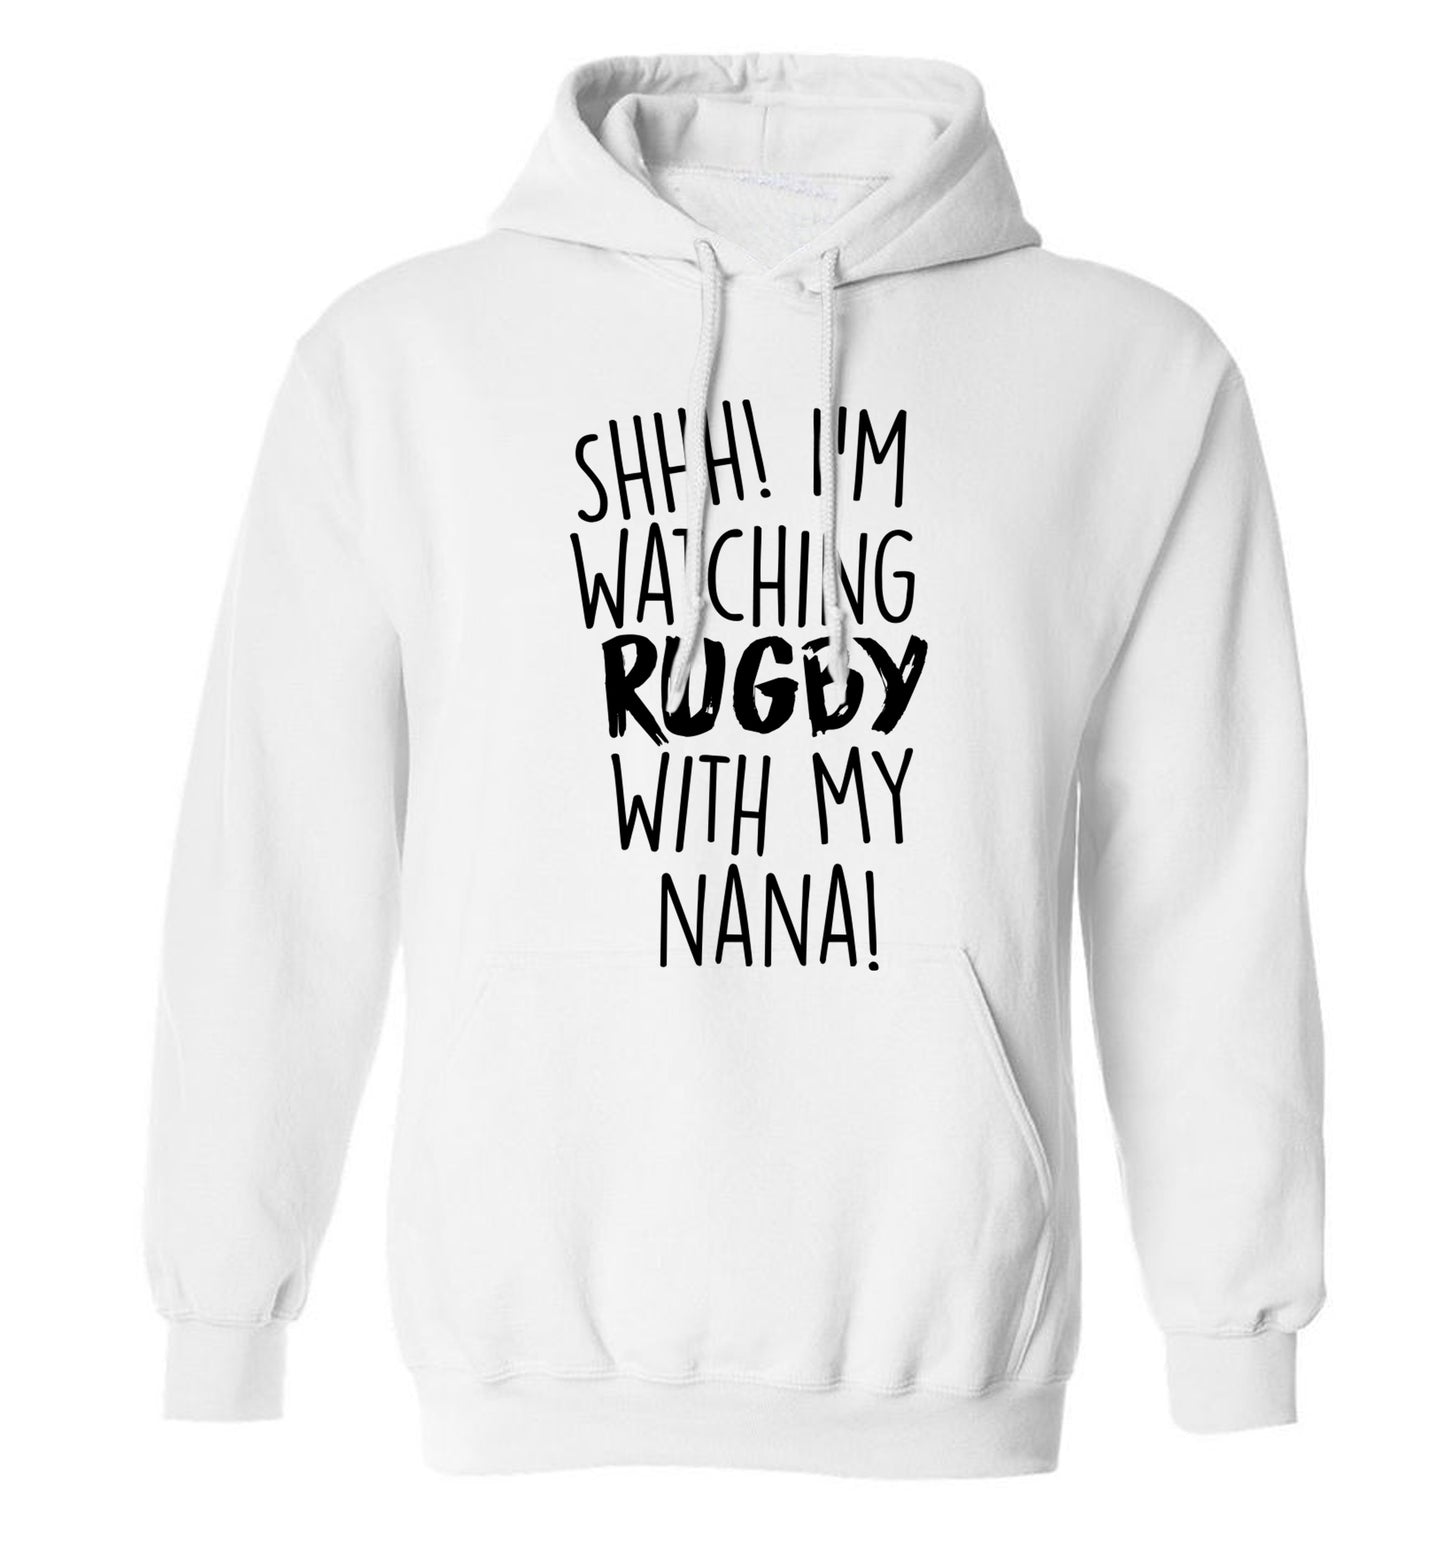 Shh I'm watching rugby with my nana adults unisex white hoodie 2XL